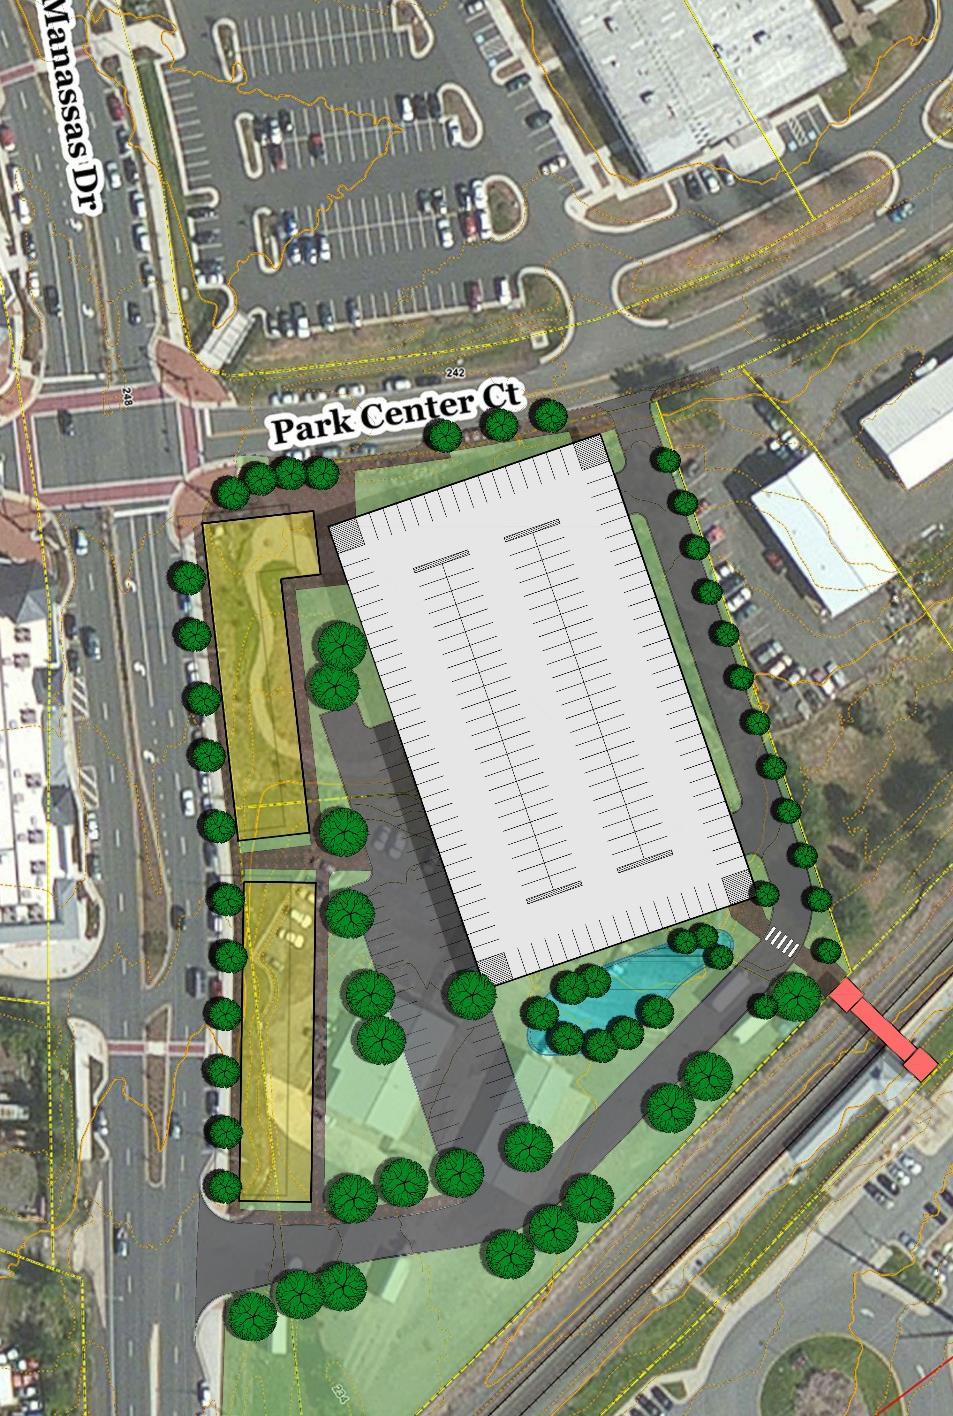 3A MILLICENT & DRIVING SCHOOL SITE 185 spaces per level 300 feet from platform on average PROS Short walk to platform 3 levels of parking Location supports shared use of spaces Retail on Manassas